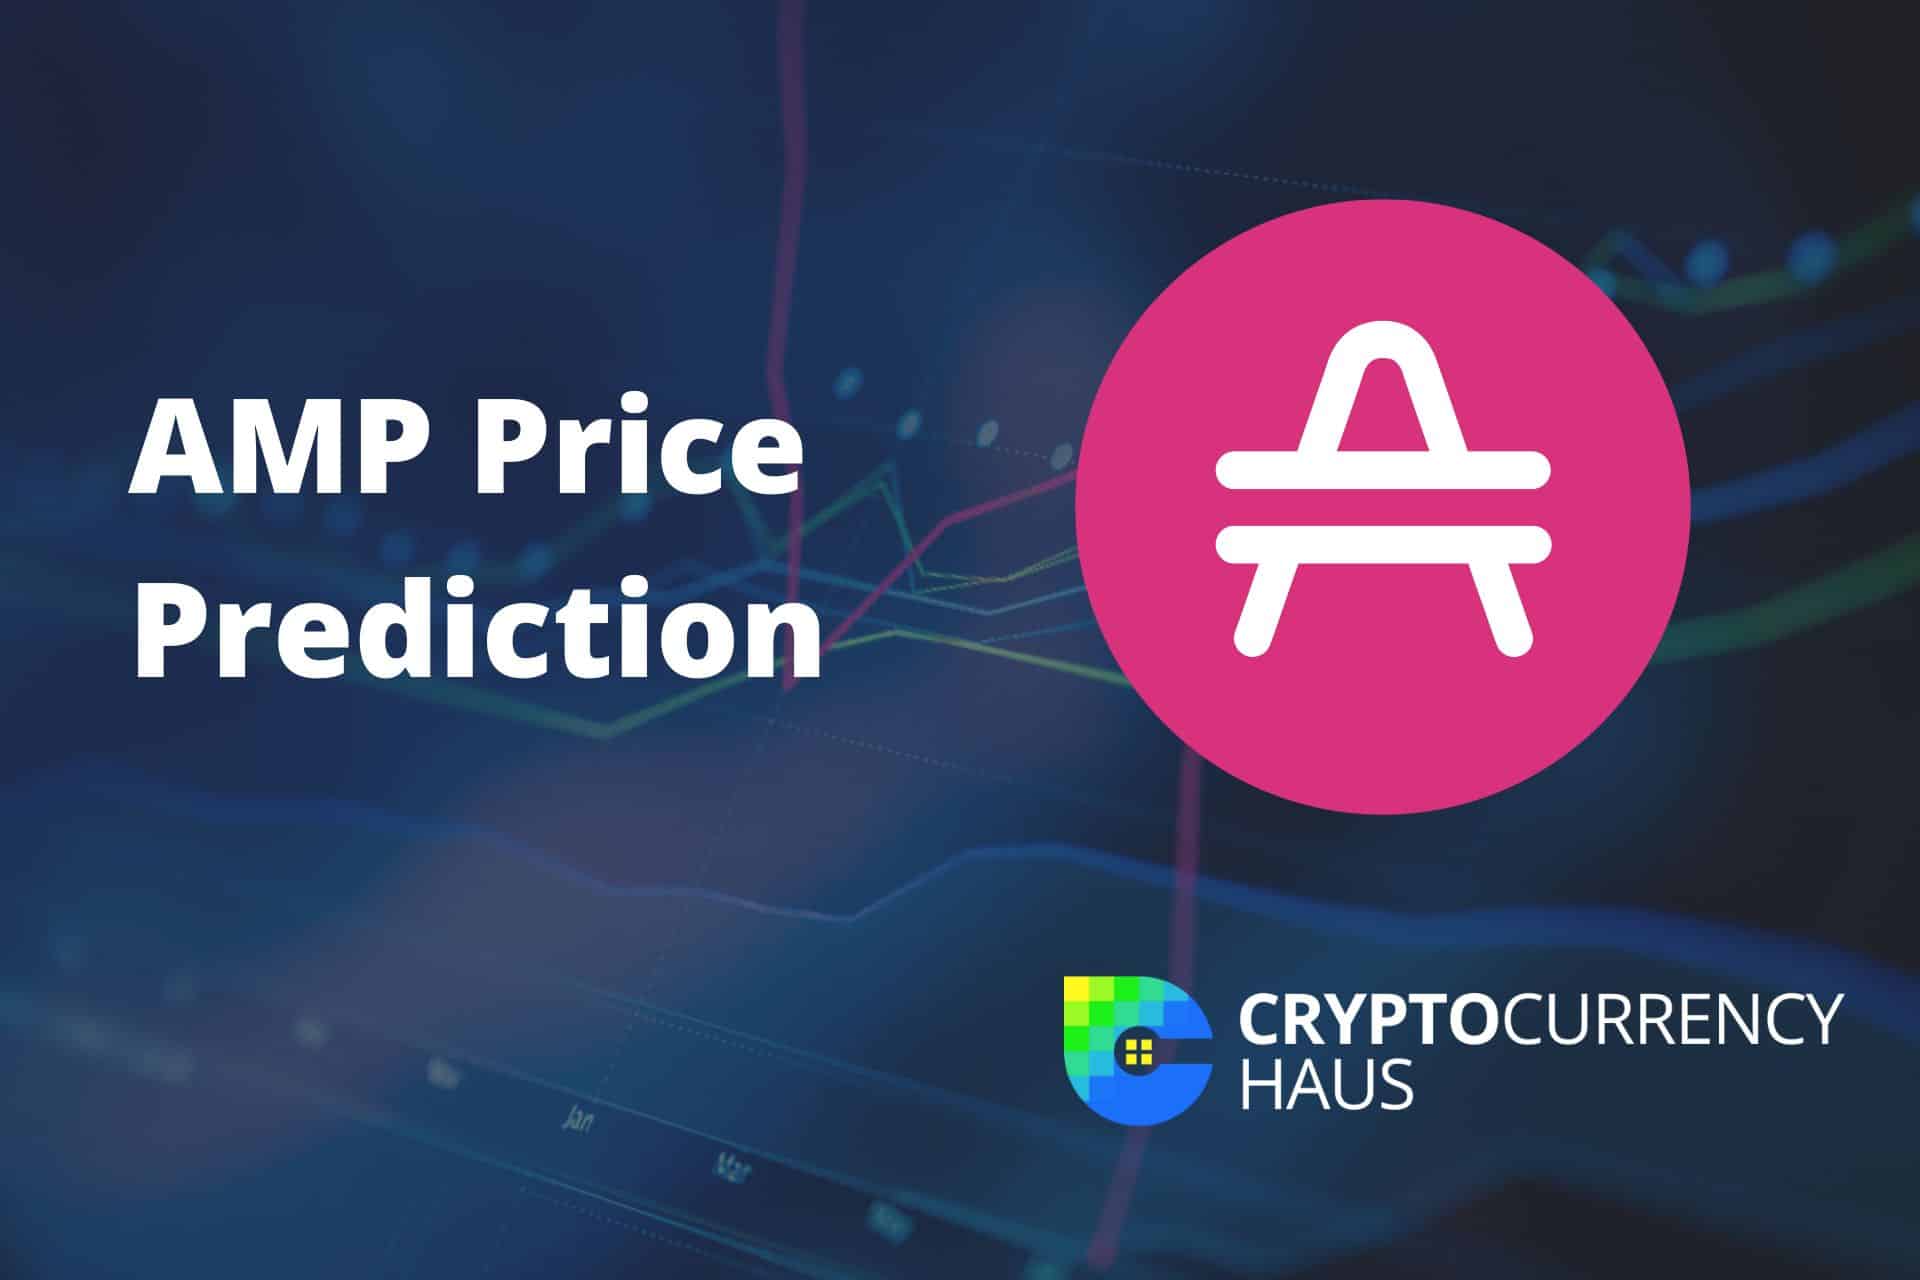 amp crypto currency price